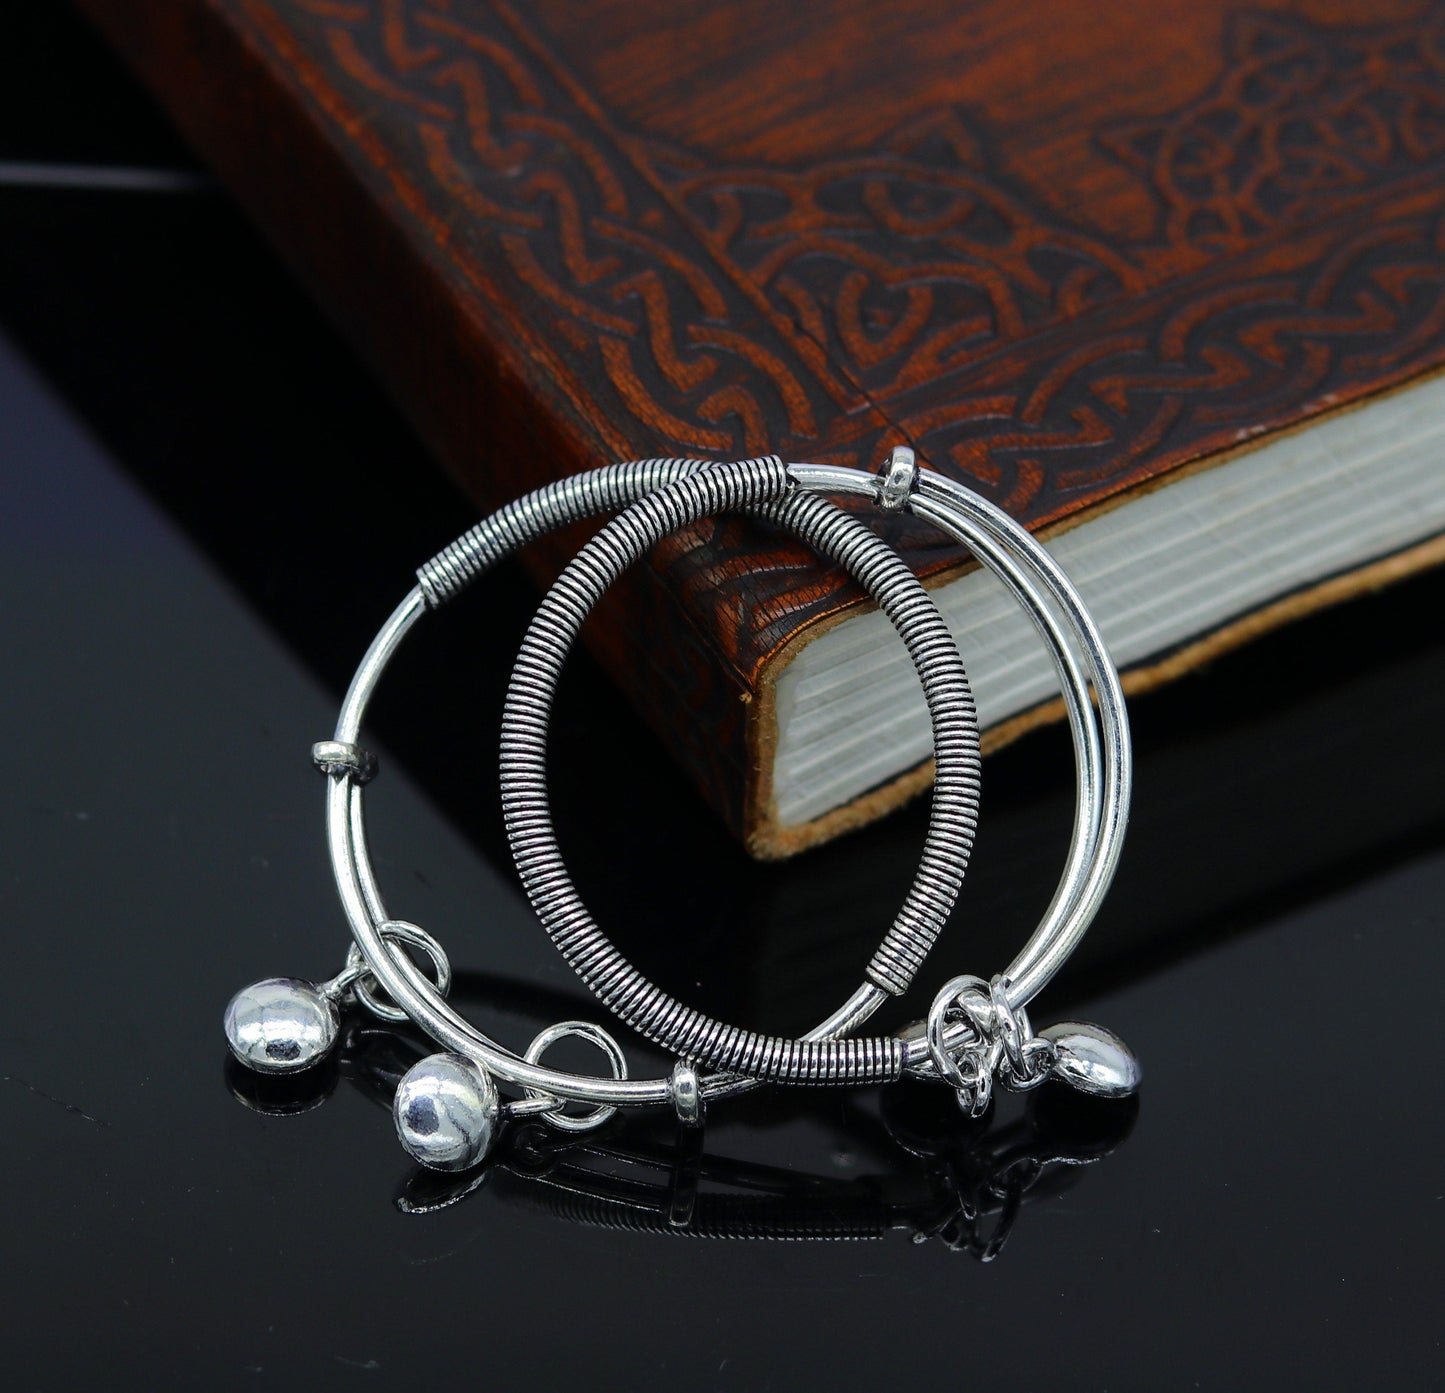 925 sterling silver handmade unique tribal style baby bangles bracelet, unisex new born baby gifting kids jewelry charm jewelry bbk80 - TRIBAL ORNAMENTS